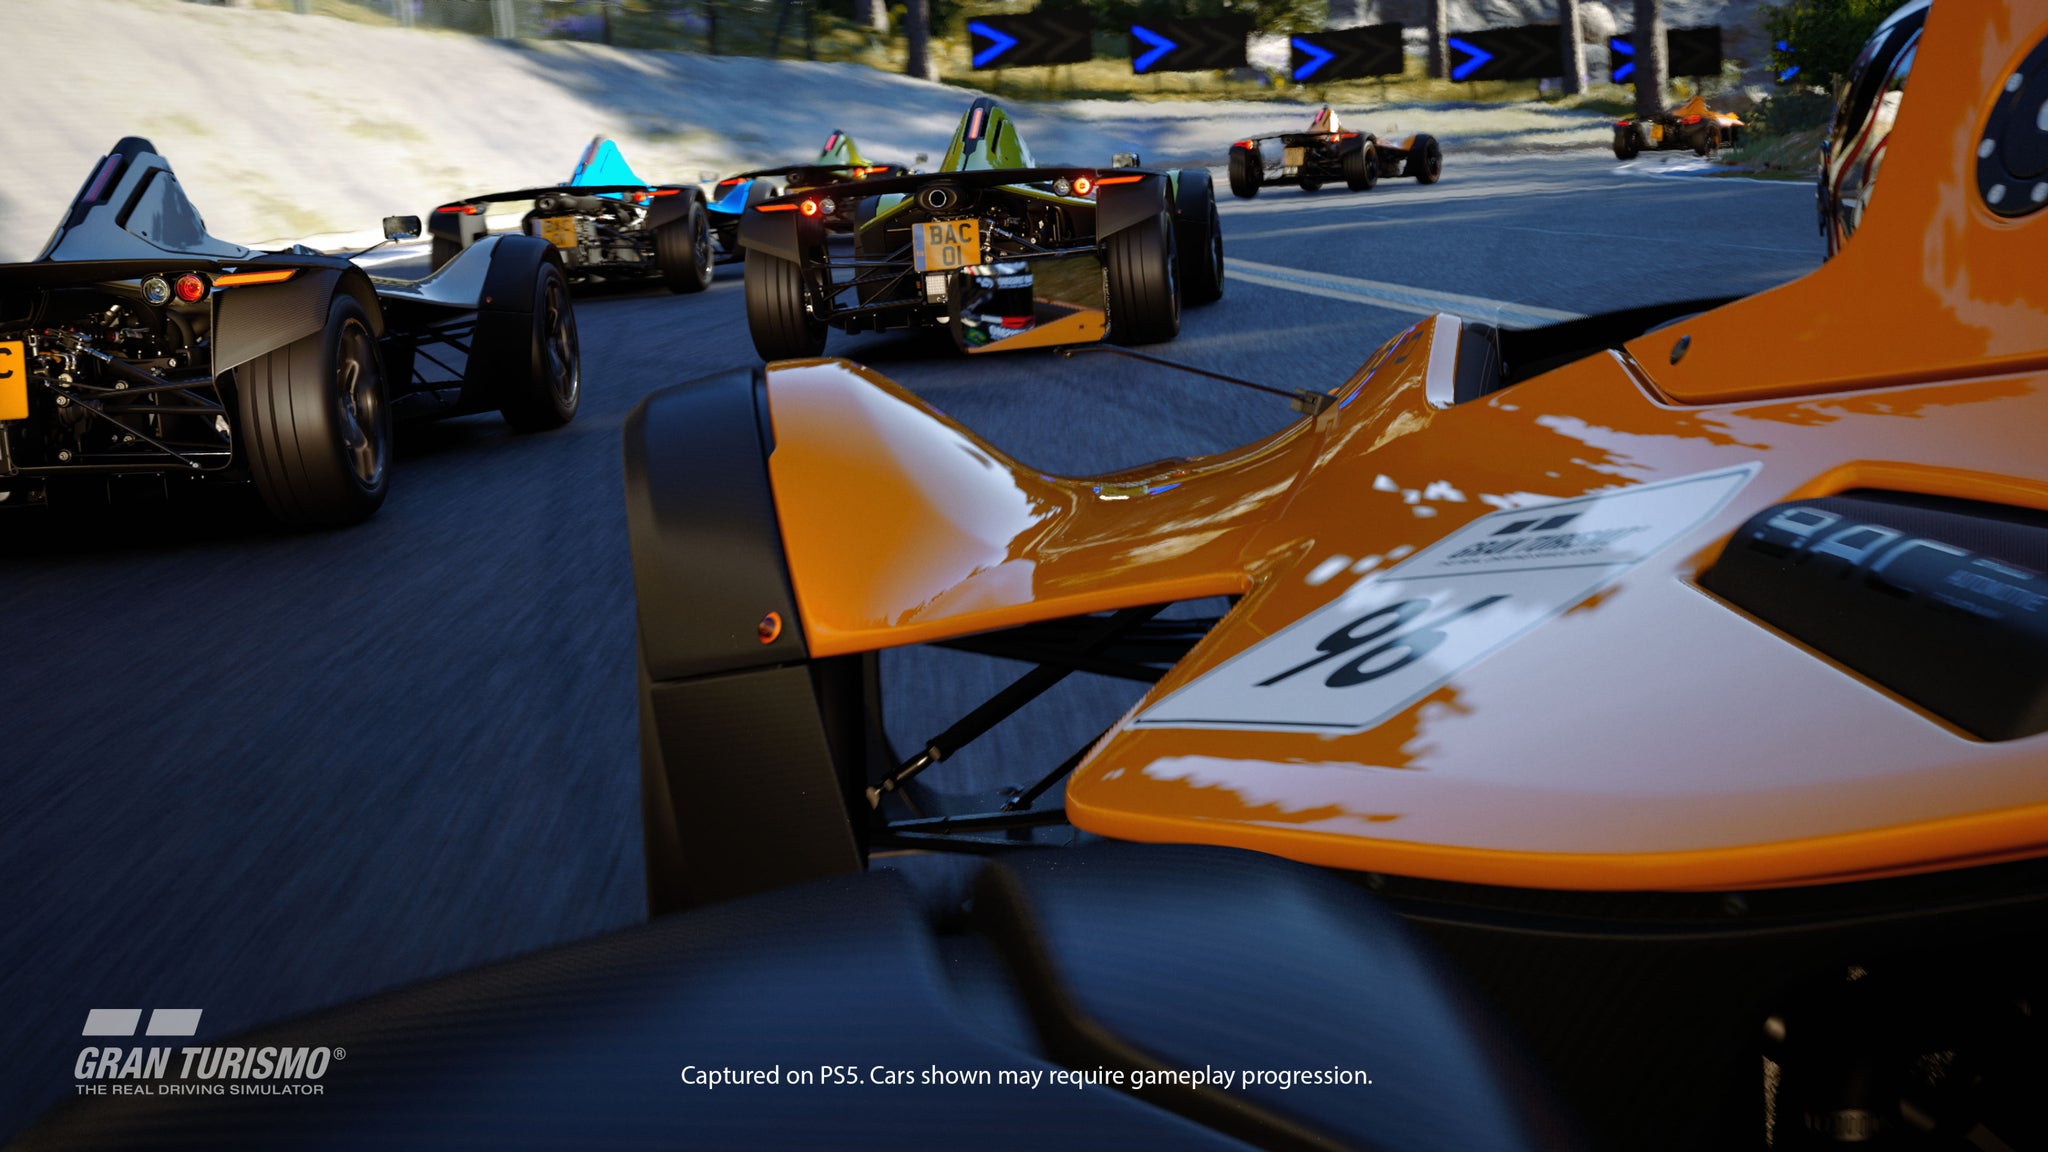 Image for Gran Turismo 7 PS5 beta test teased by PlayStation website